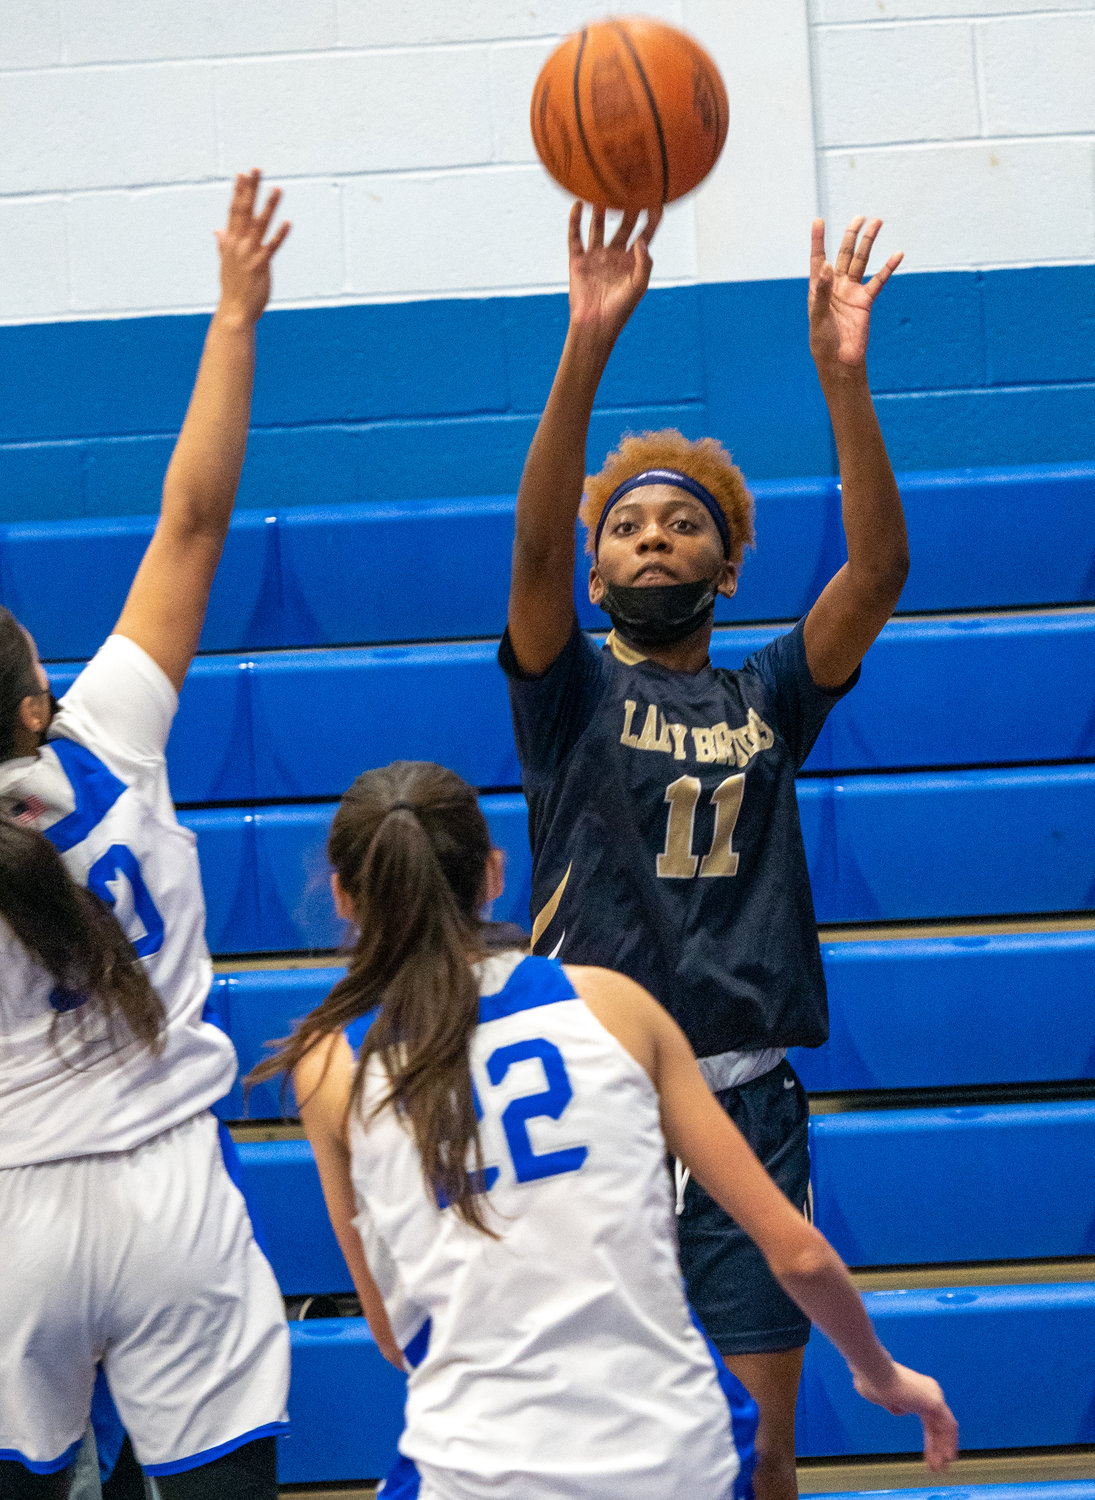 Sophomore Renelle Grannum (8 points) was part of a balanced scoring effort Jan. 4 as Baldwin, in just its second game due to COVID-19 protocols, beat Herricks.